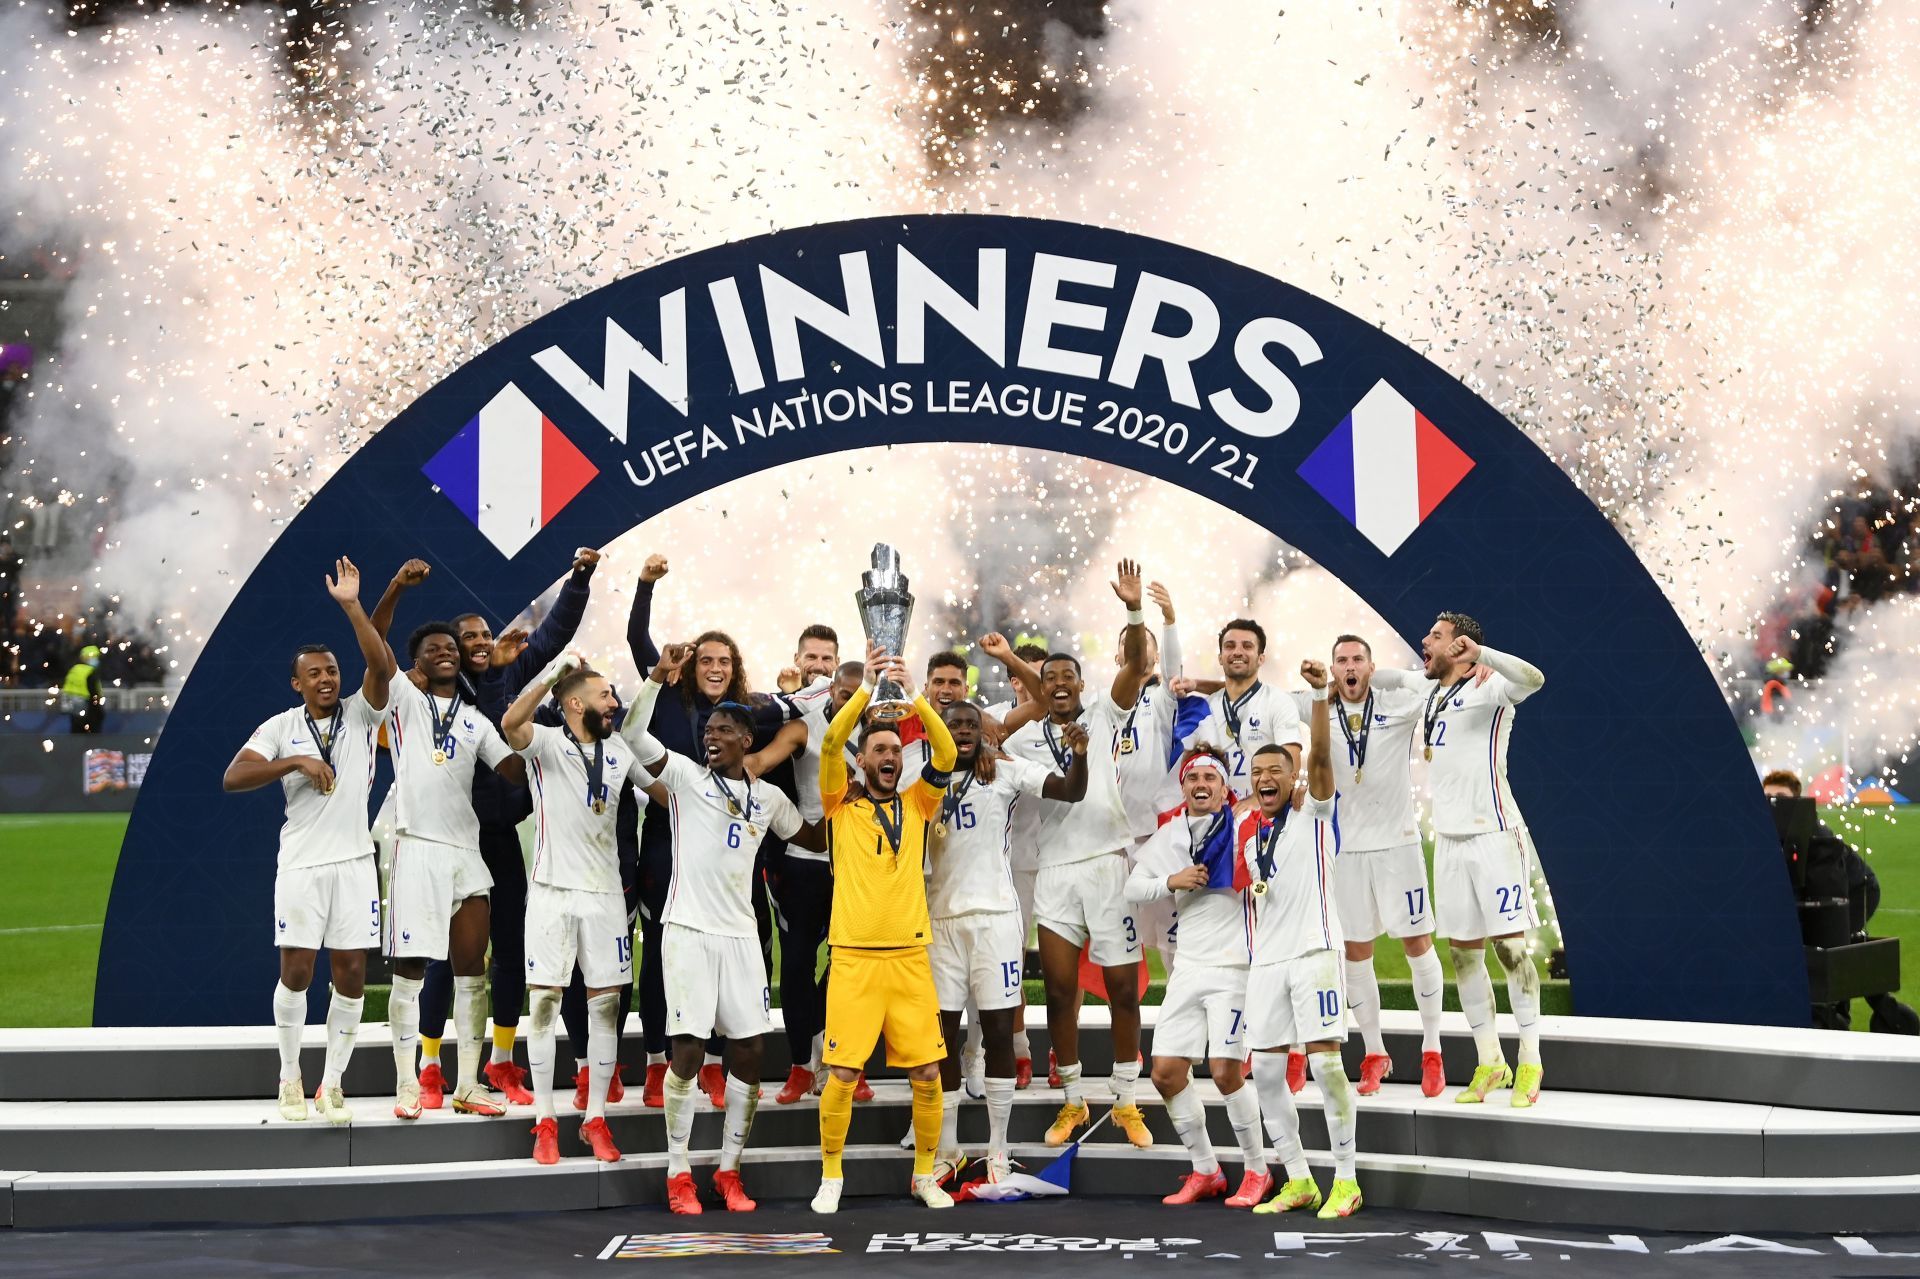 France made up for their Euro 2020 disappointment by winning the Nations League.